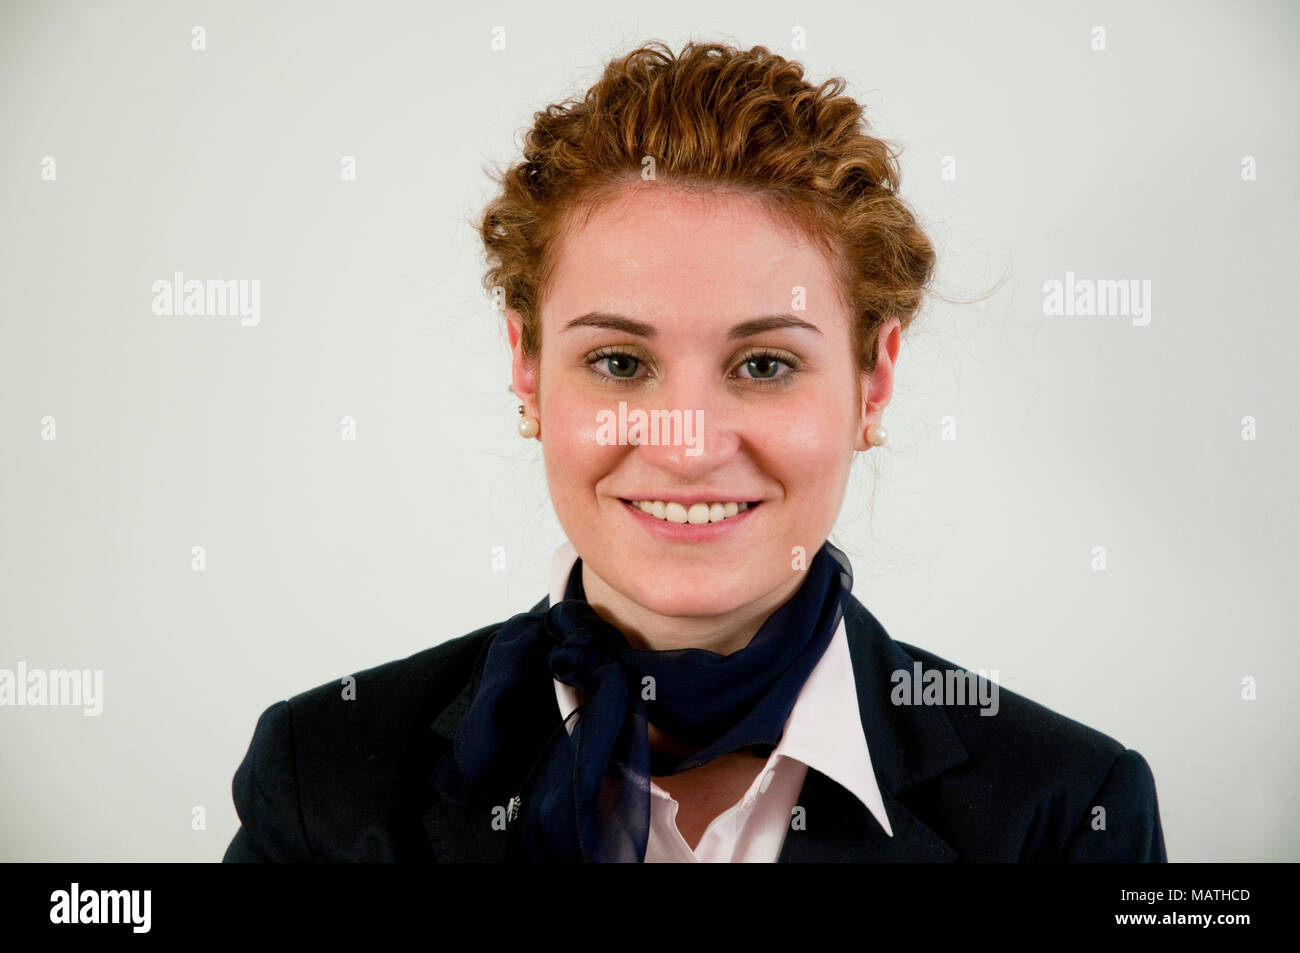 Portrait of young executive woman smiling and looking at the camera. Stock Photo